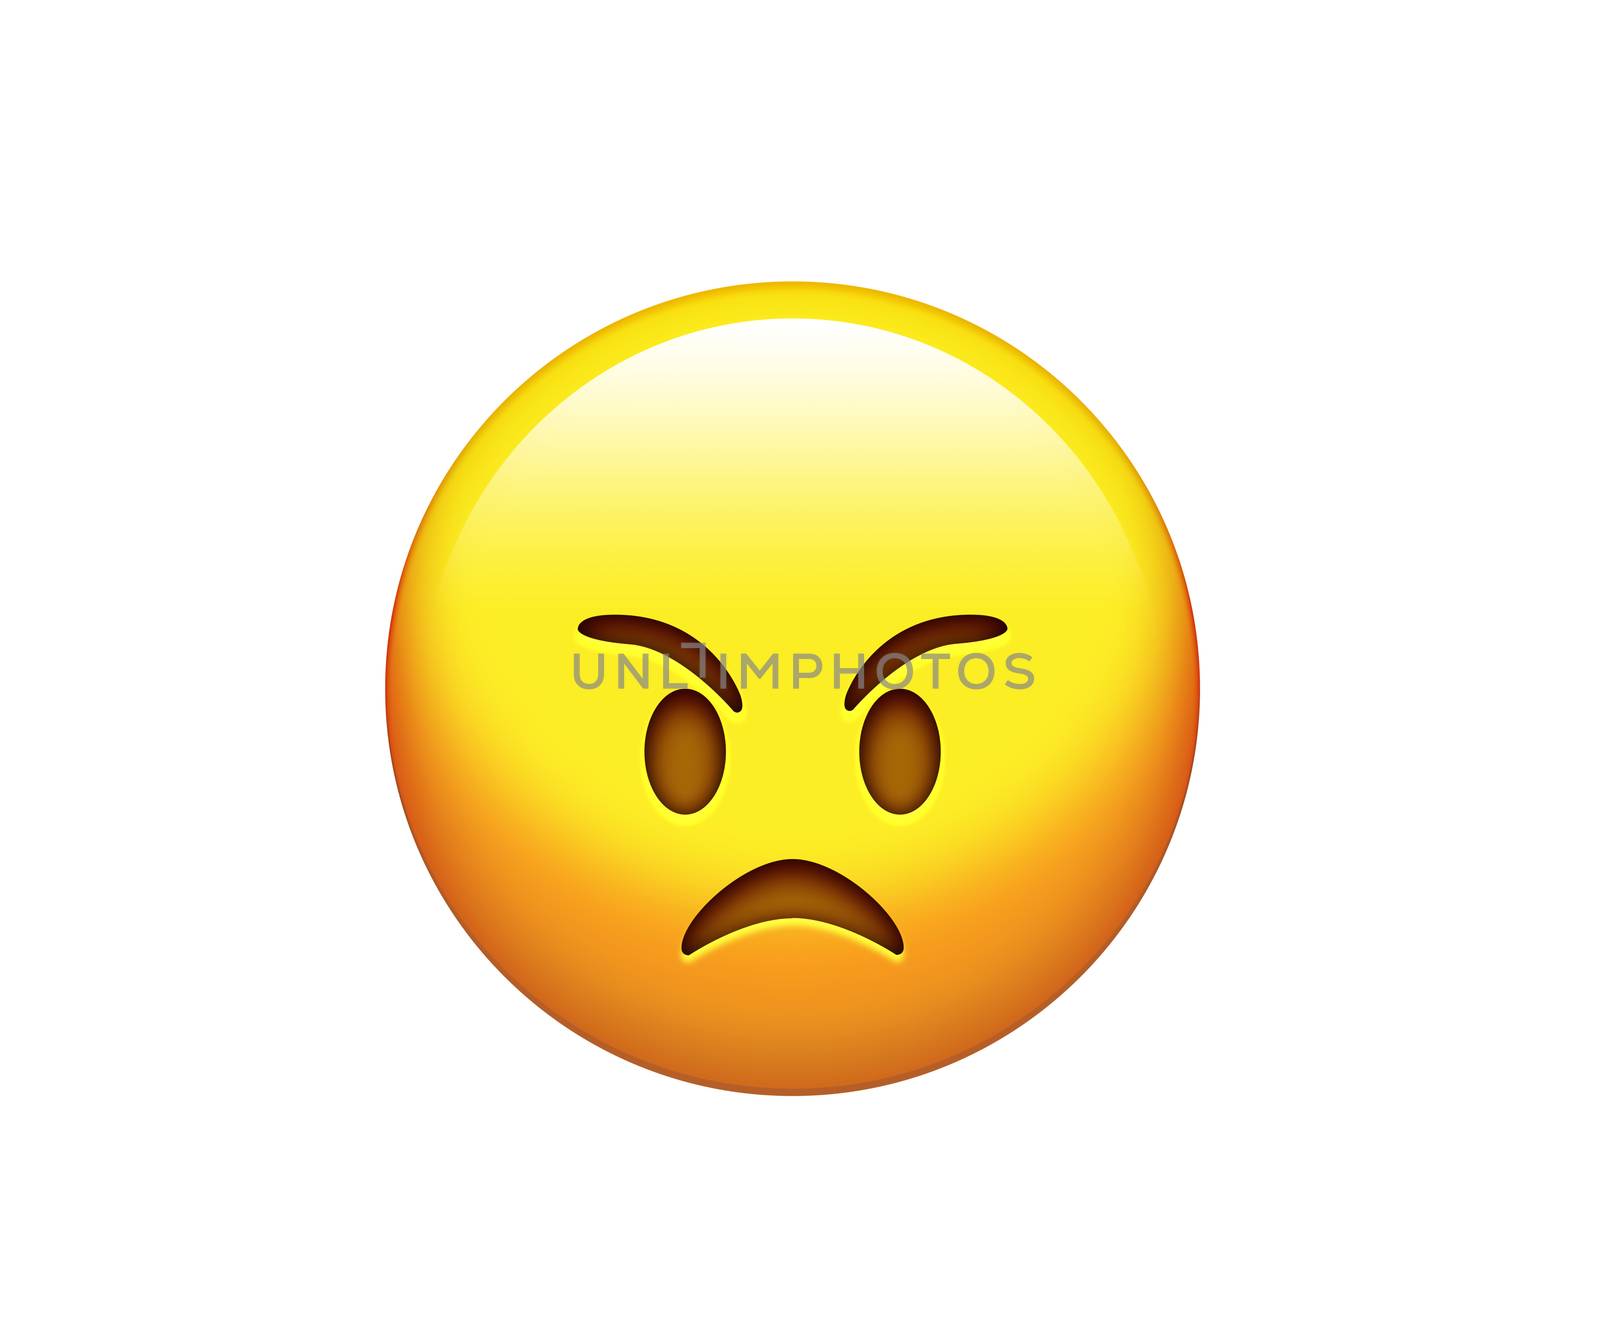 The emoji yellow angry emotional face icon